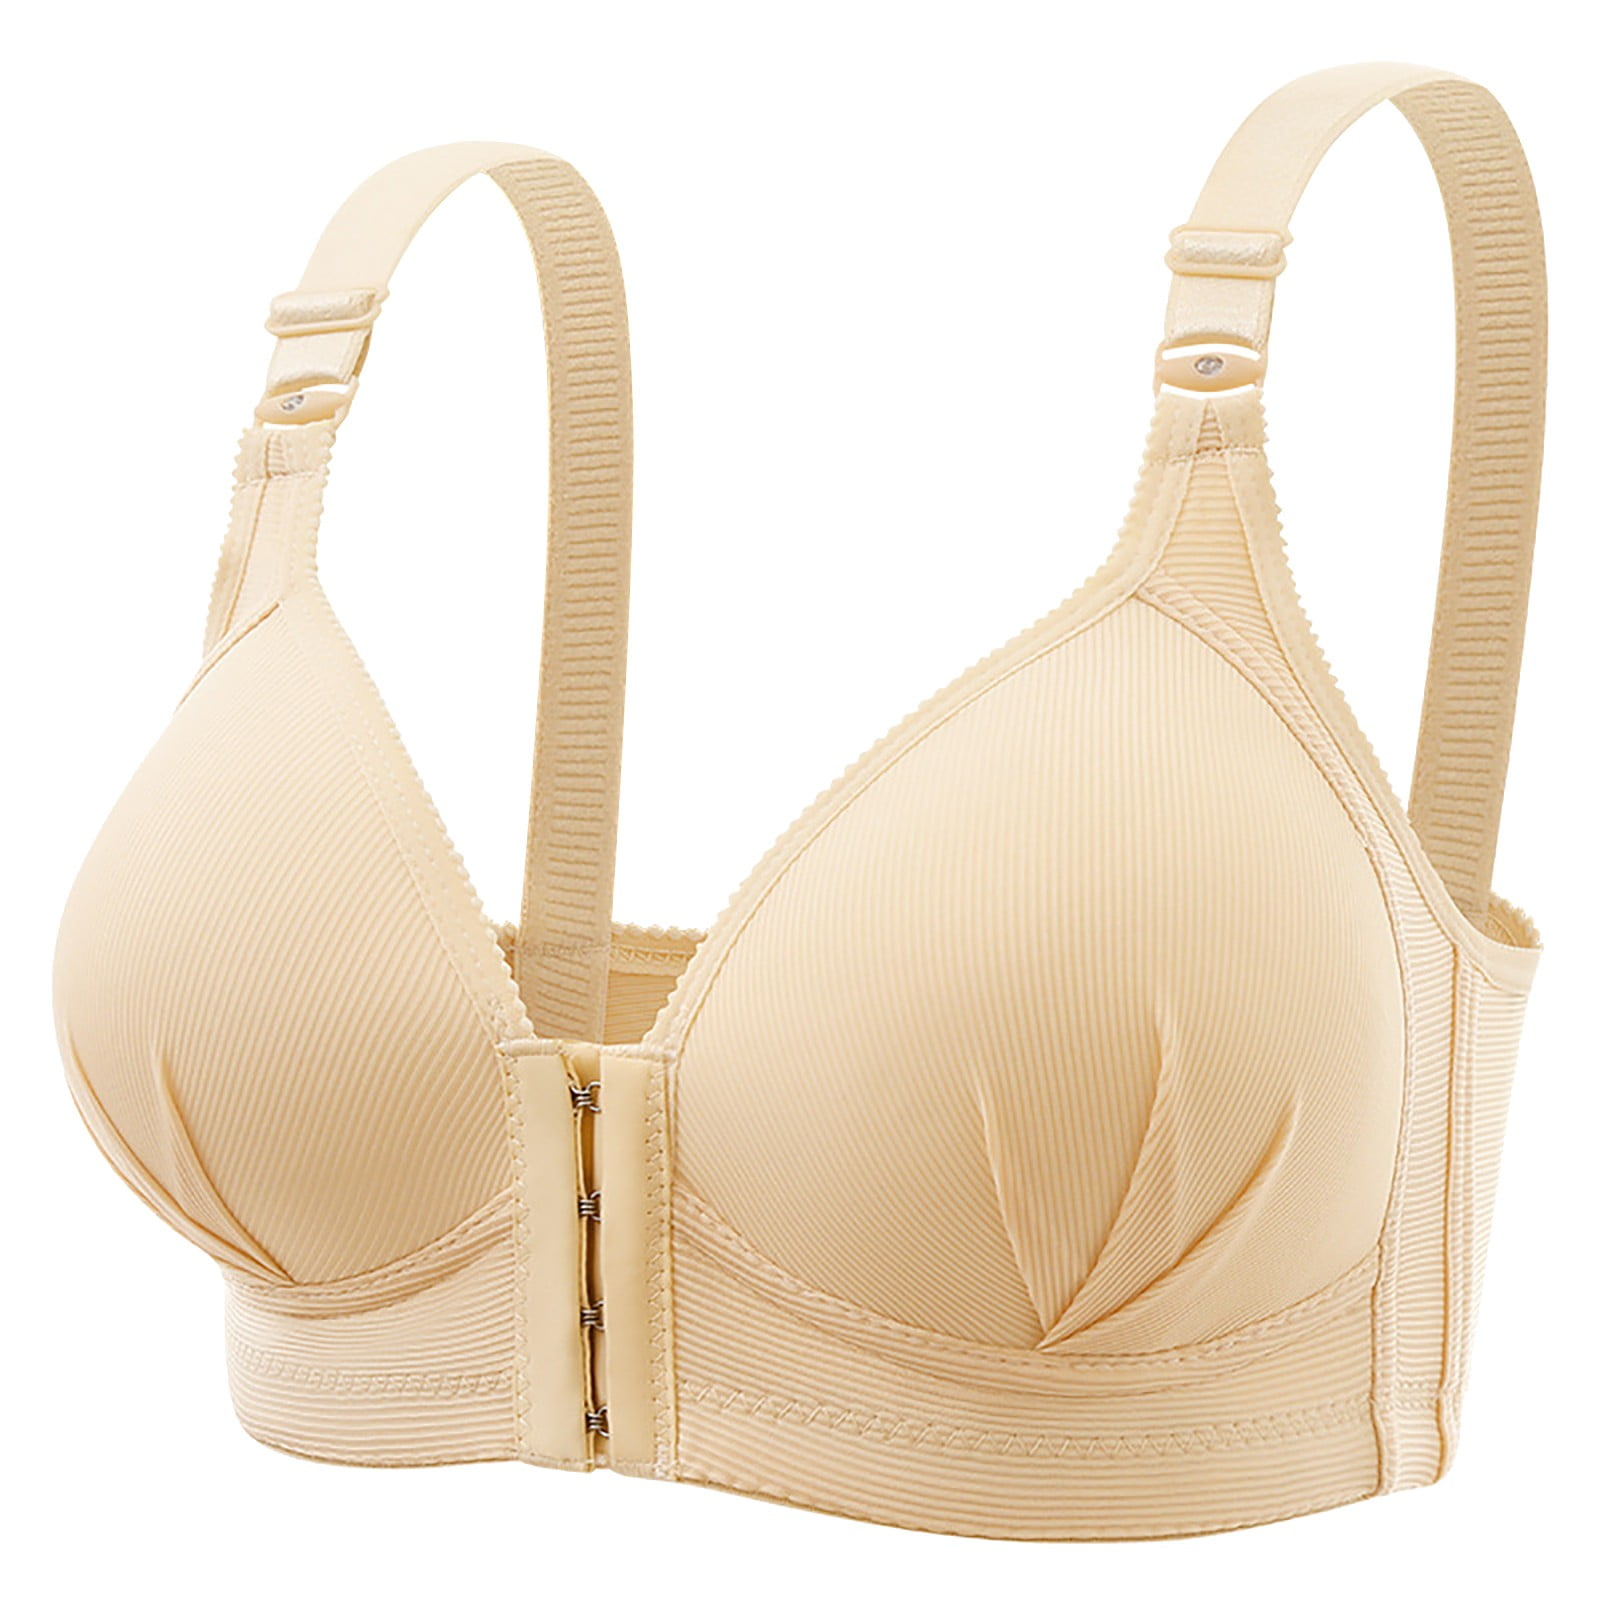 Eashery Front Closure Bras for Women Live It Up Underwire Bra